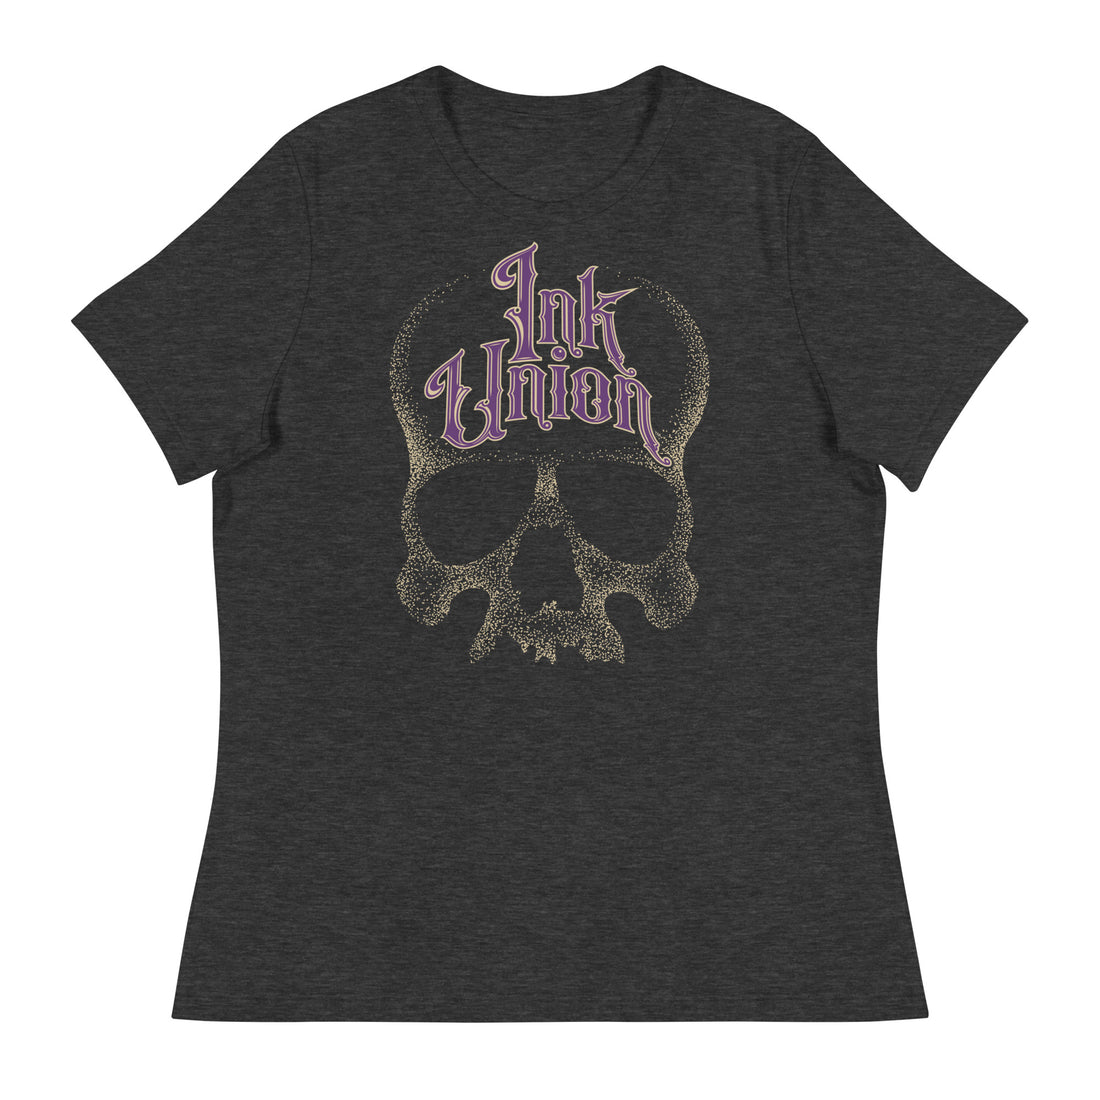 A dark grey t-shirt adorned with a gold dot work human skull  and the words Ink Union in fancy gold and purple lettering across the forehead of the skull.